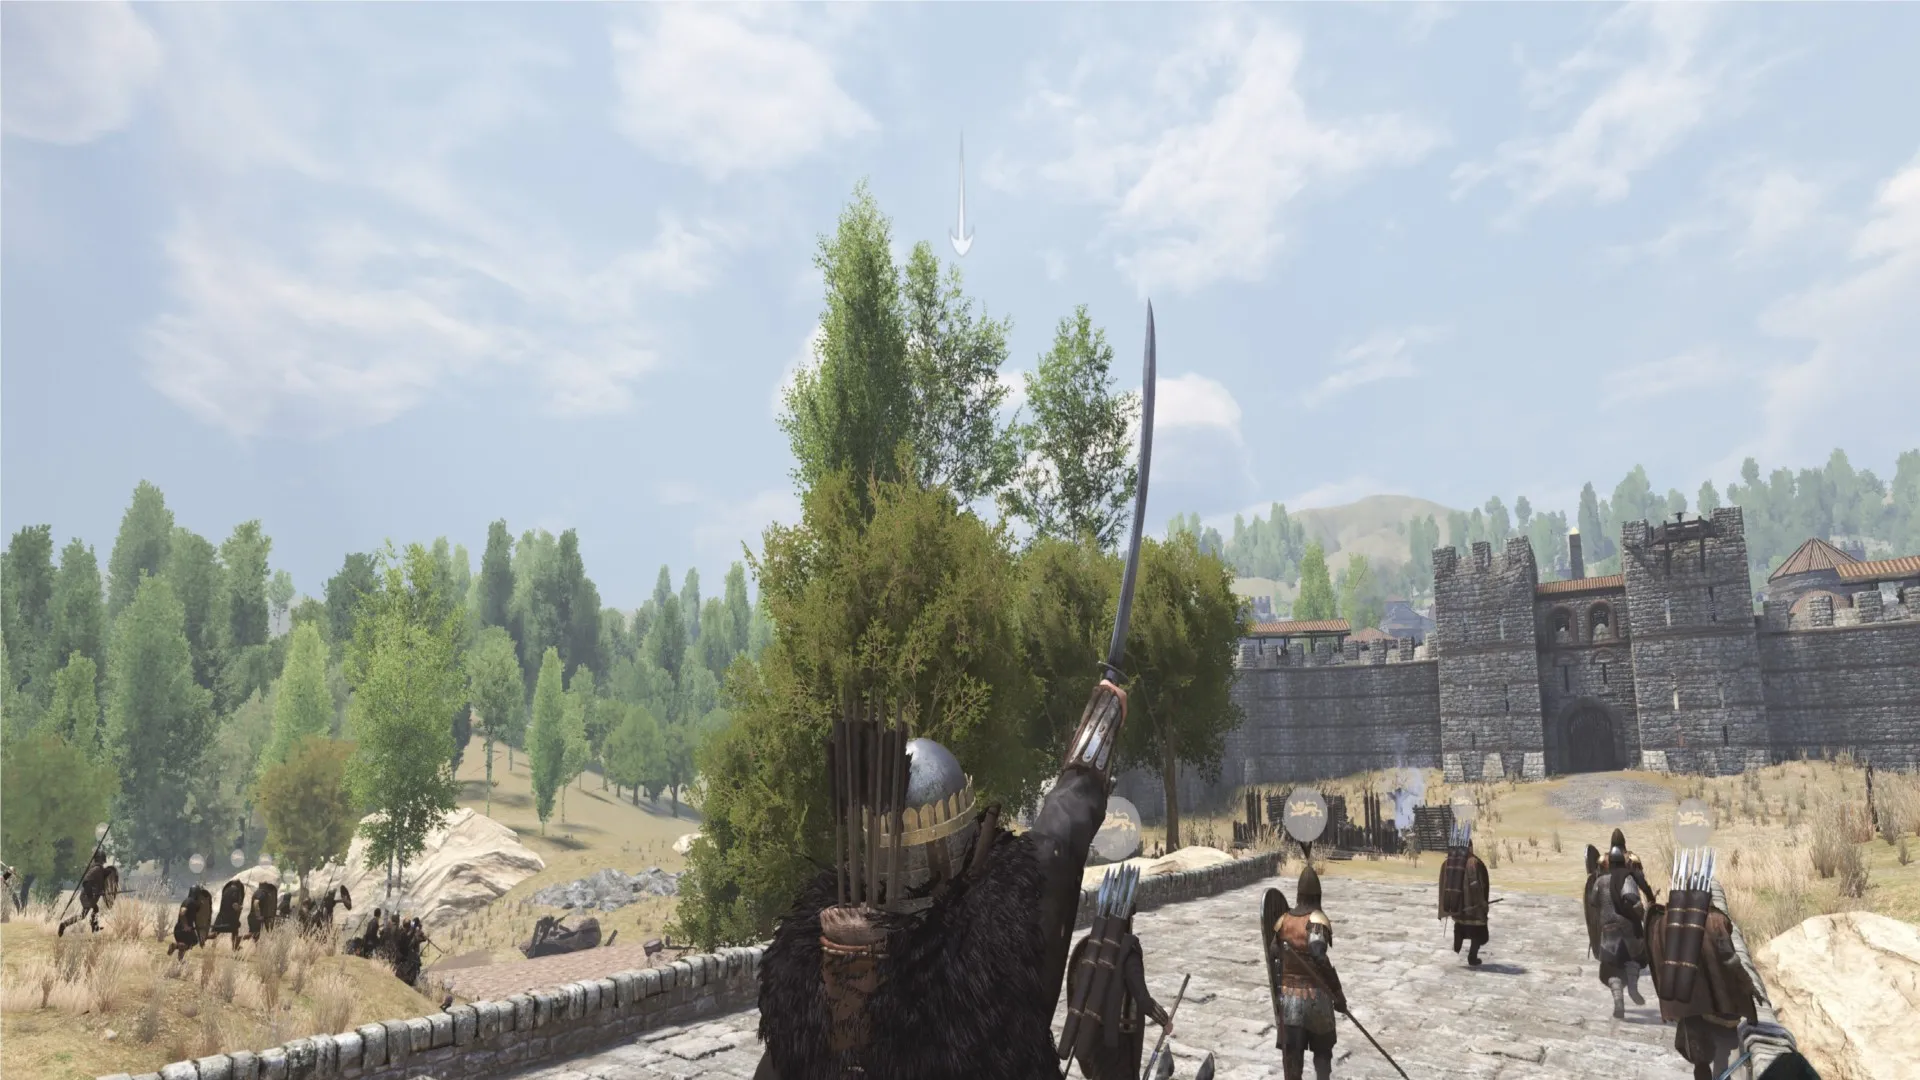 Mount and blade bannerlord караваны. Mount and Blade 2 Bannerlord. Mount and Blade 2 Bannerlord старт. Mount & Blade II: Bannerlord (2022) PC. Mount and Blade 2 Bannerlord аваситон.